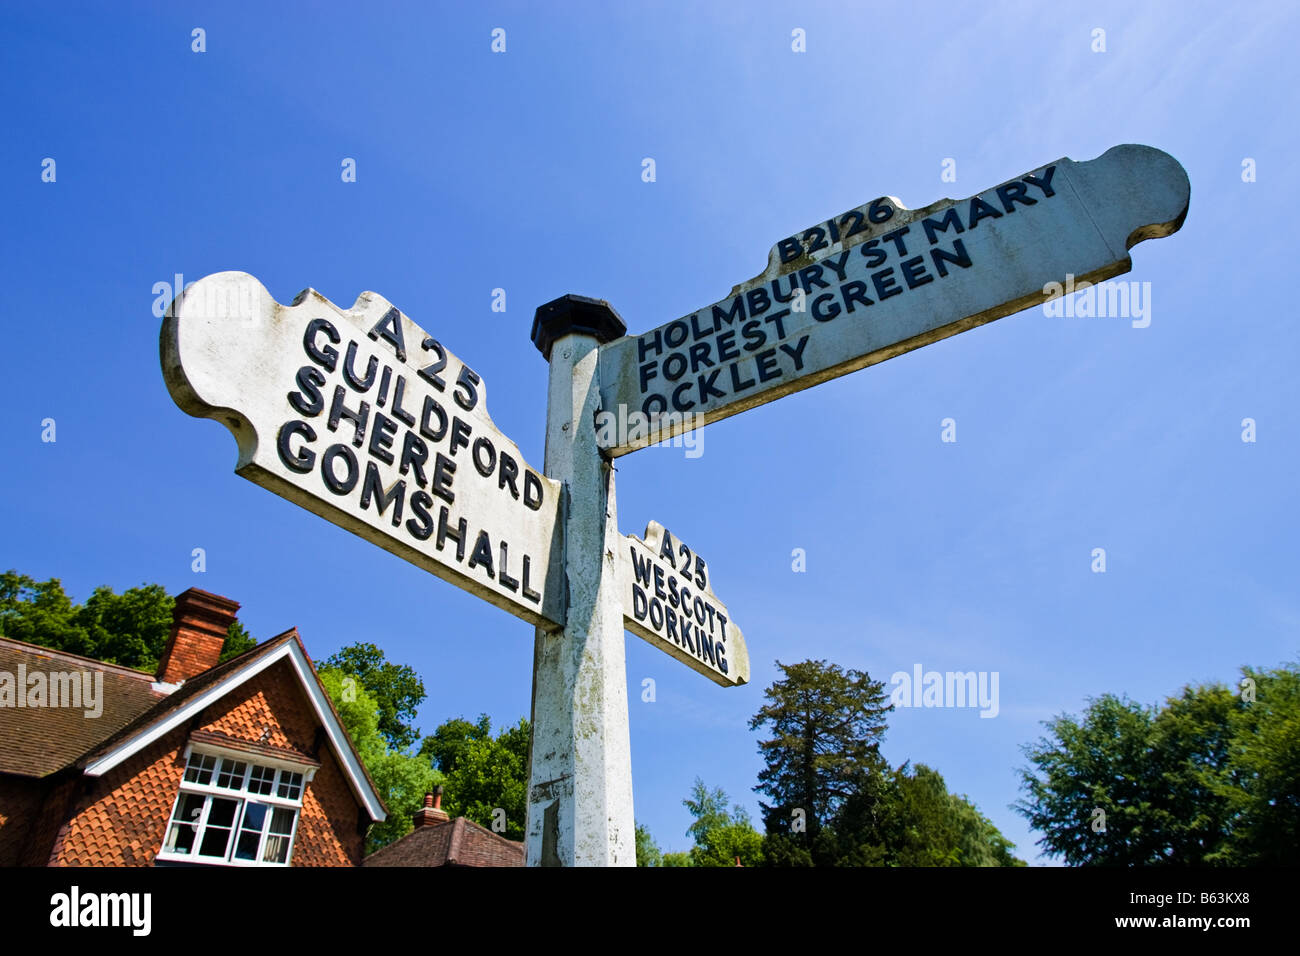 Signpost giving directions to local villages at Abinger Hammer, Surrey, England, UK Stock Photo